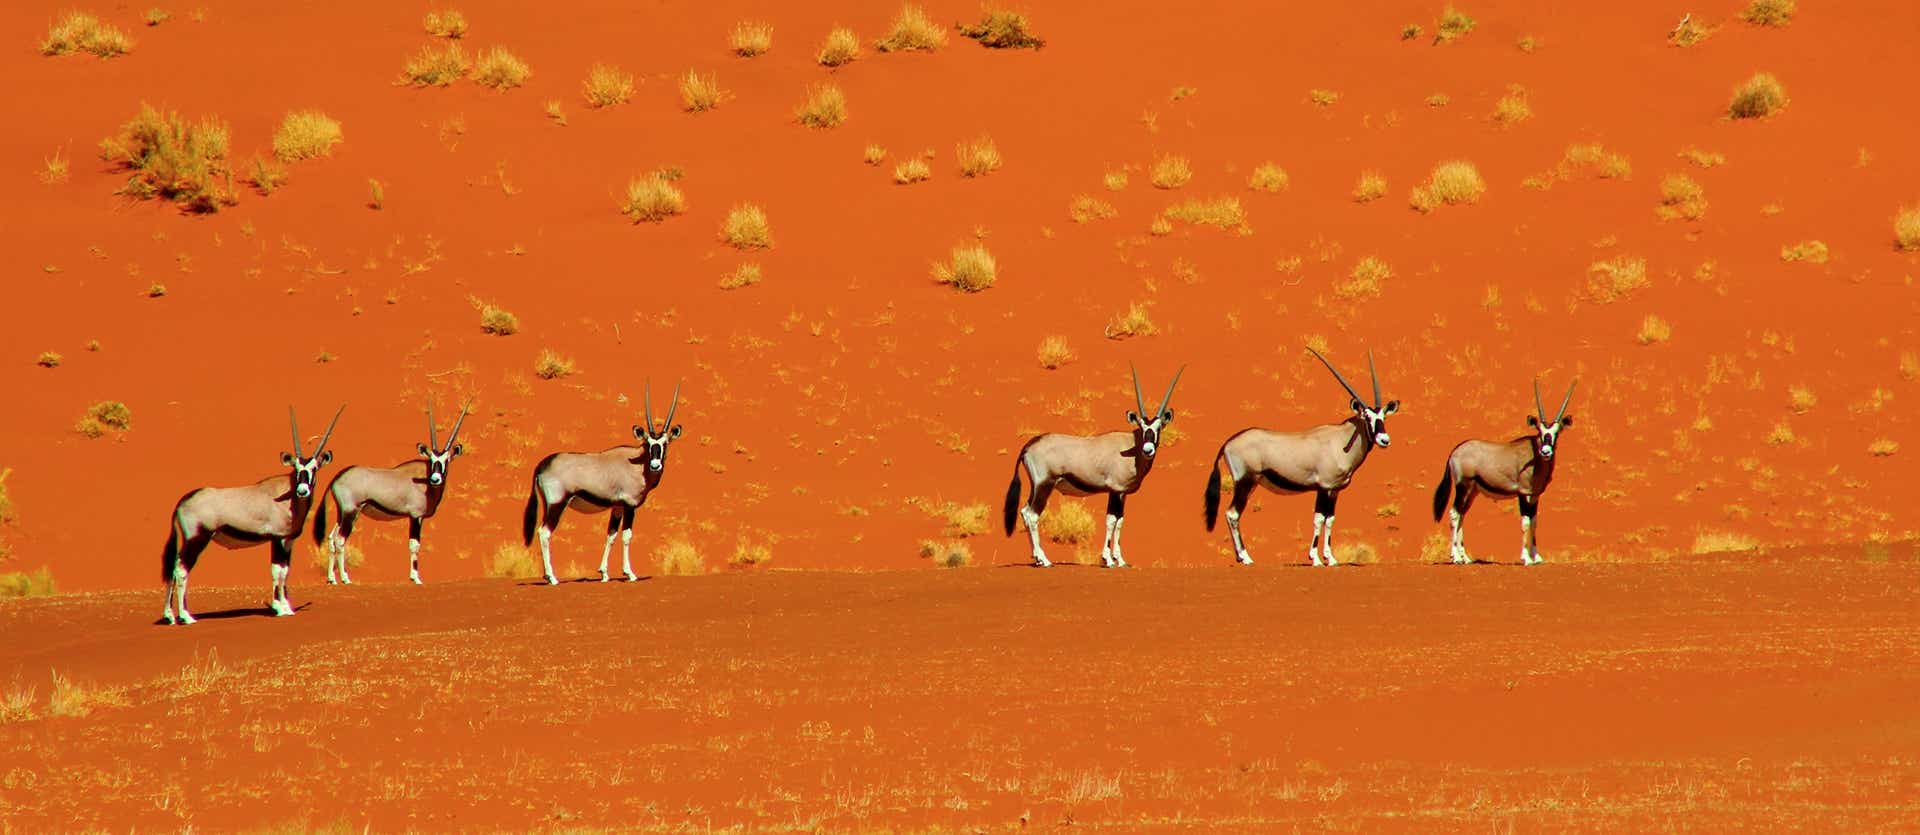 Oryx herd looking for grazing <span class="iconos separador"></span> Namib Desert <span class="iconos separador"></span> Namibia